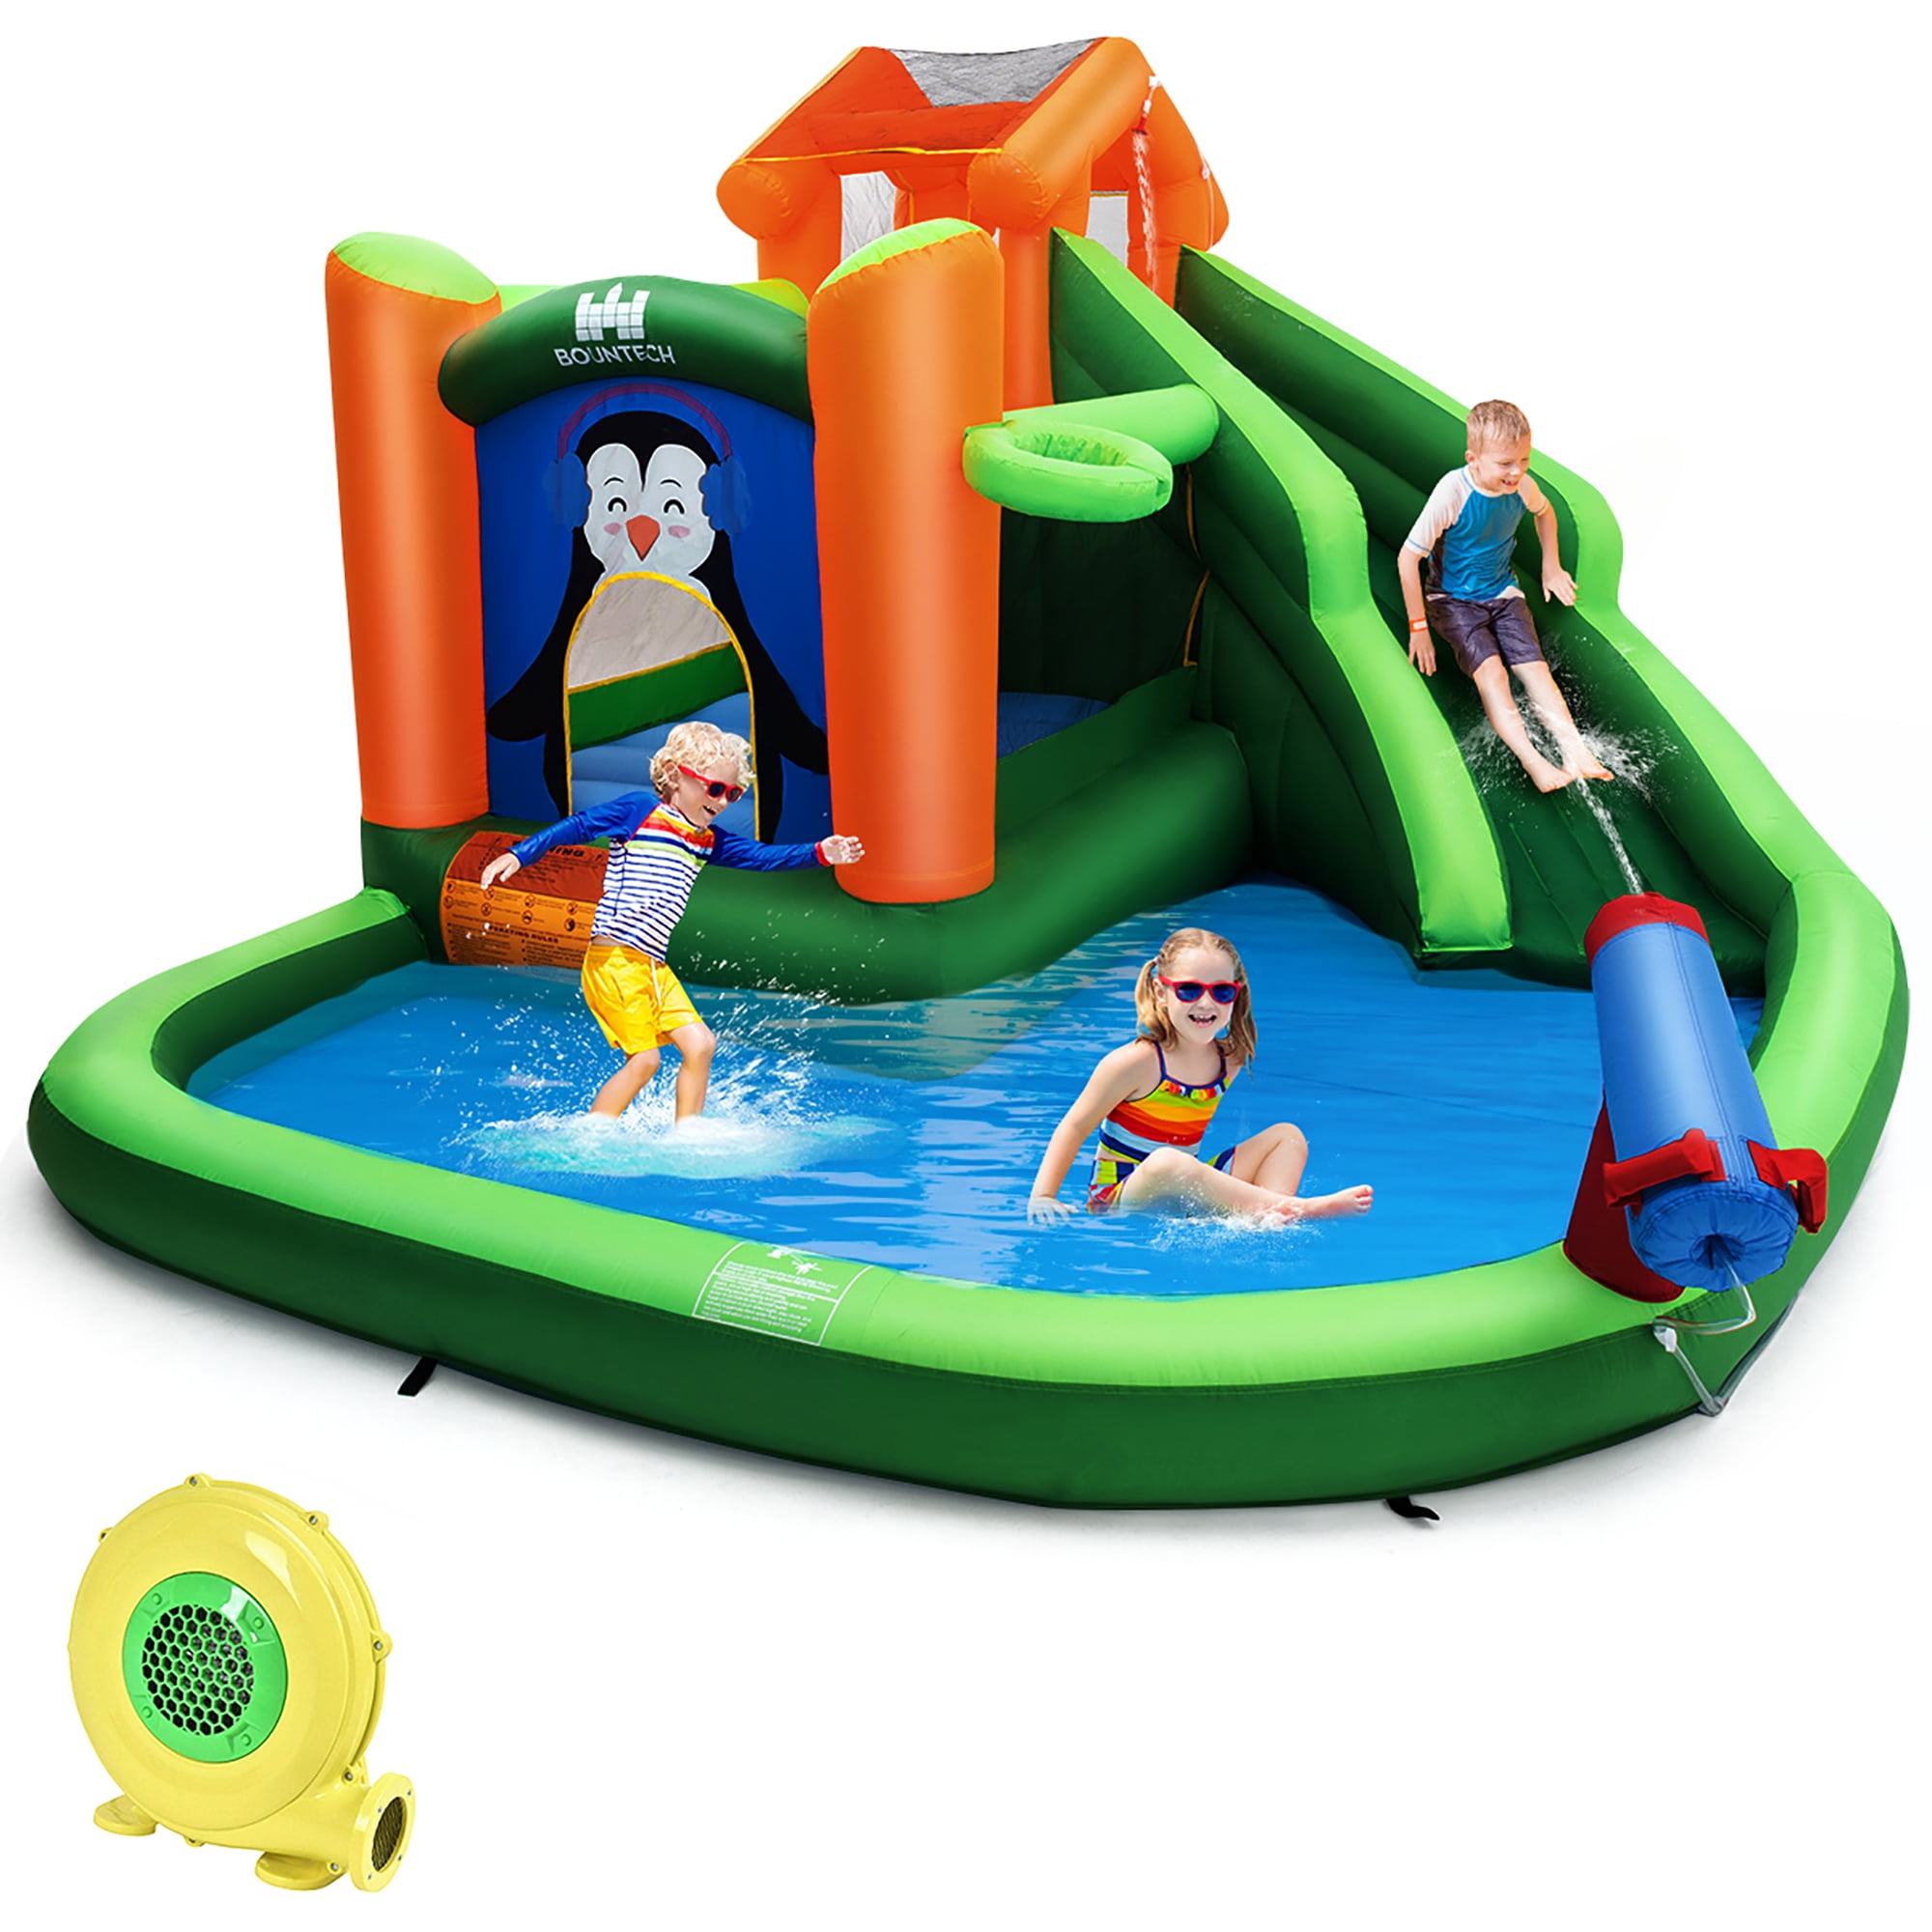 Details about   Inflatable Water Slide Bounce House Bouncer Kids Jumper Climbing w/ 480W Blower 